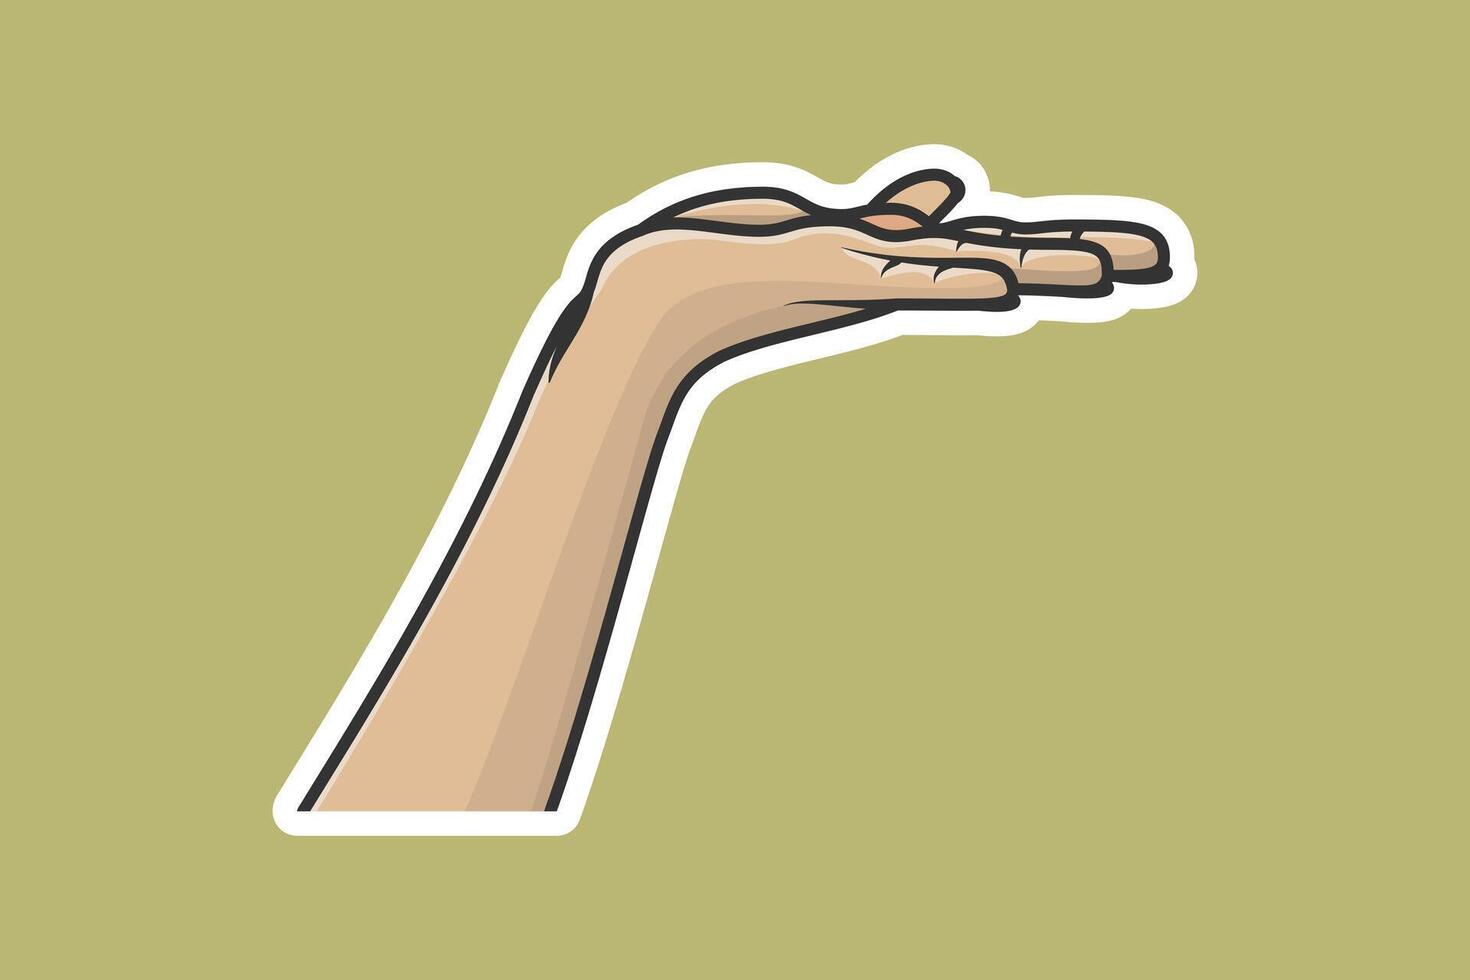 Human Hand of Young Man Showing Fingers Sticker vector illustration. People hand objects icon concept. Flat palm presenting product offer and giving gesture sticker design logo.